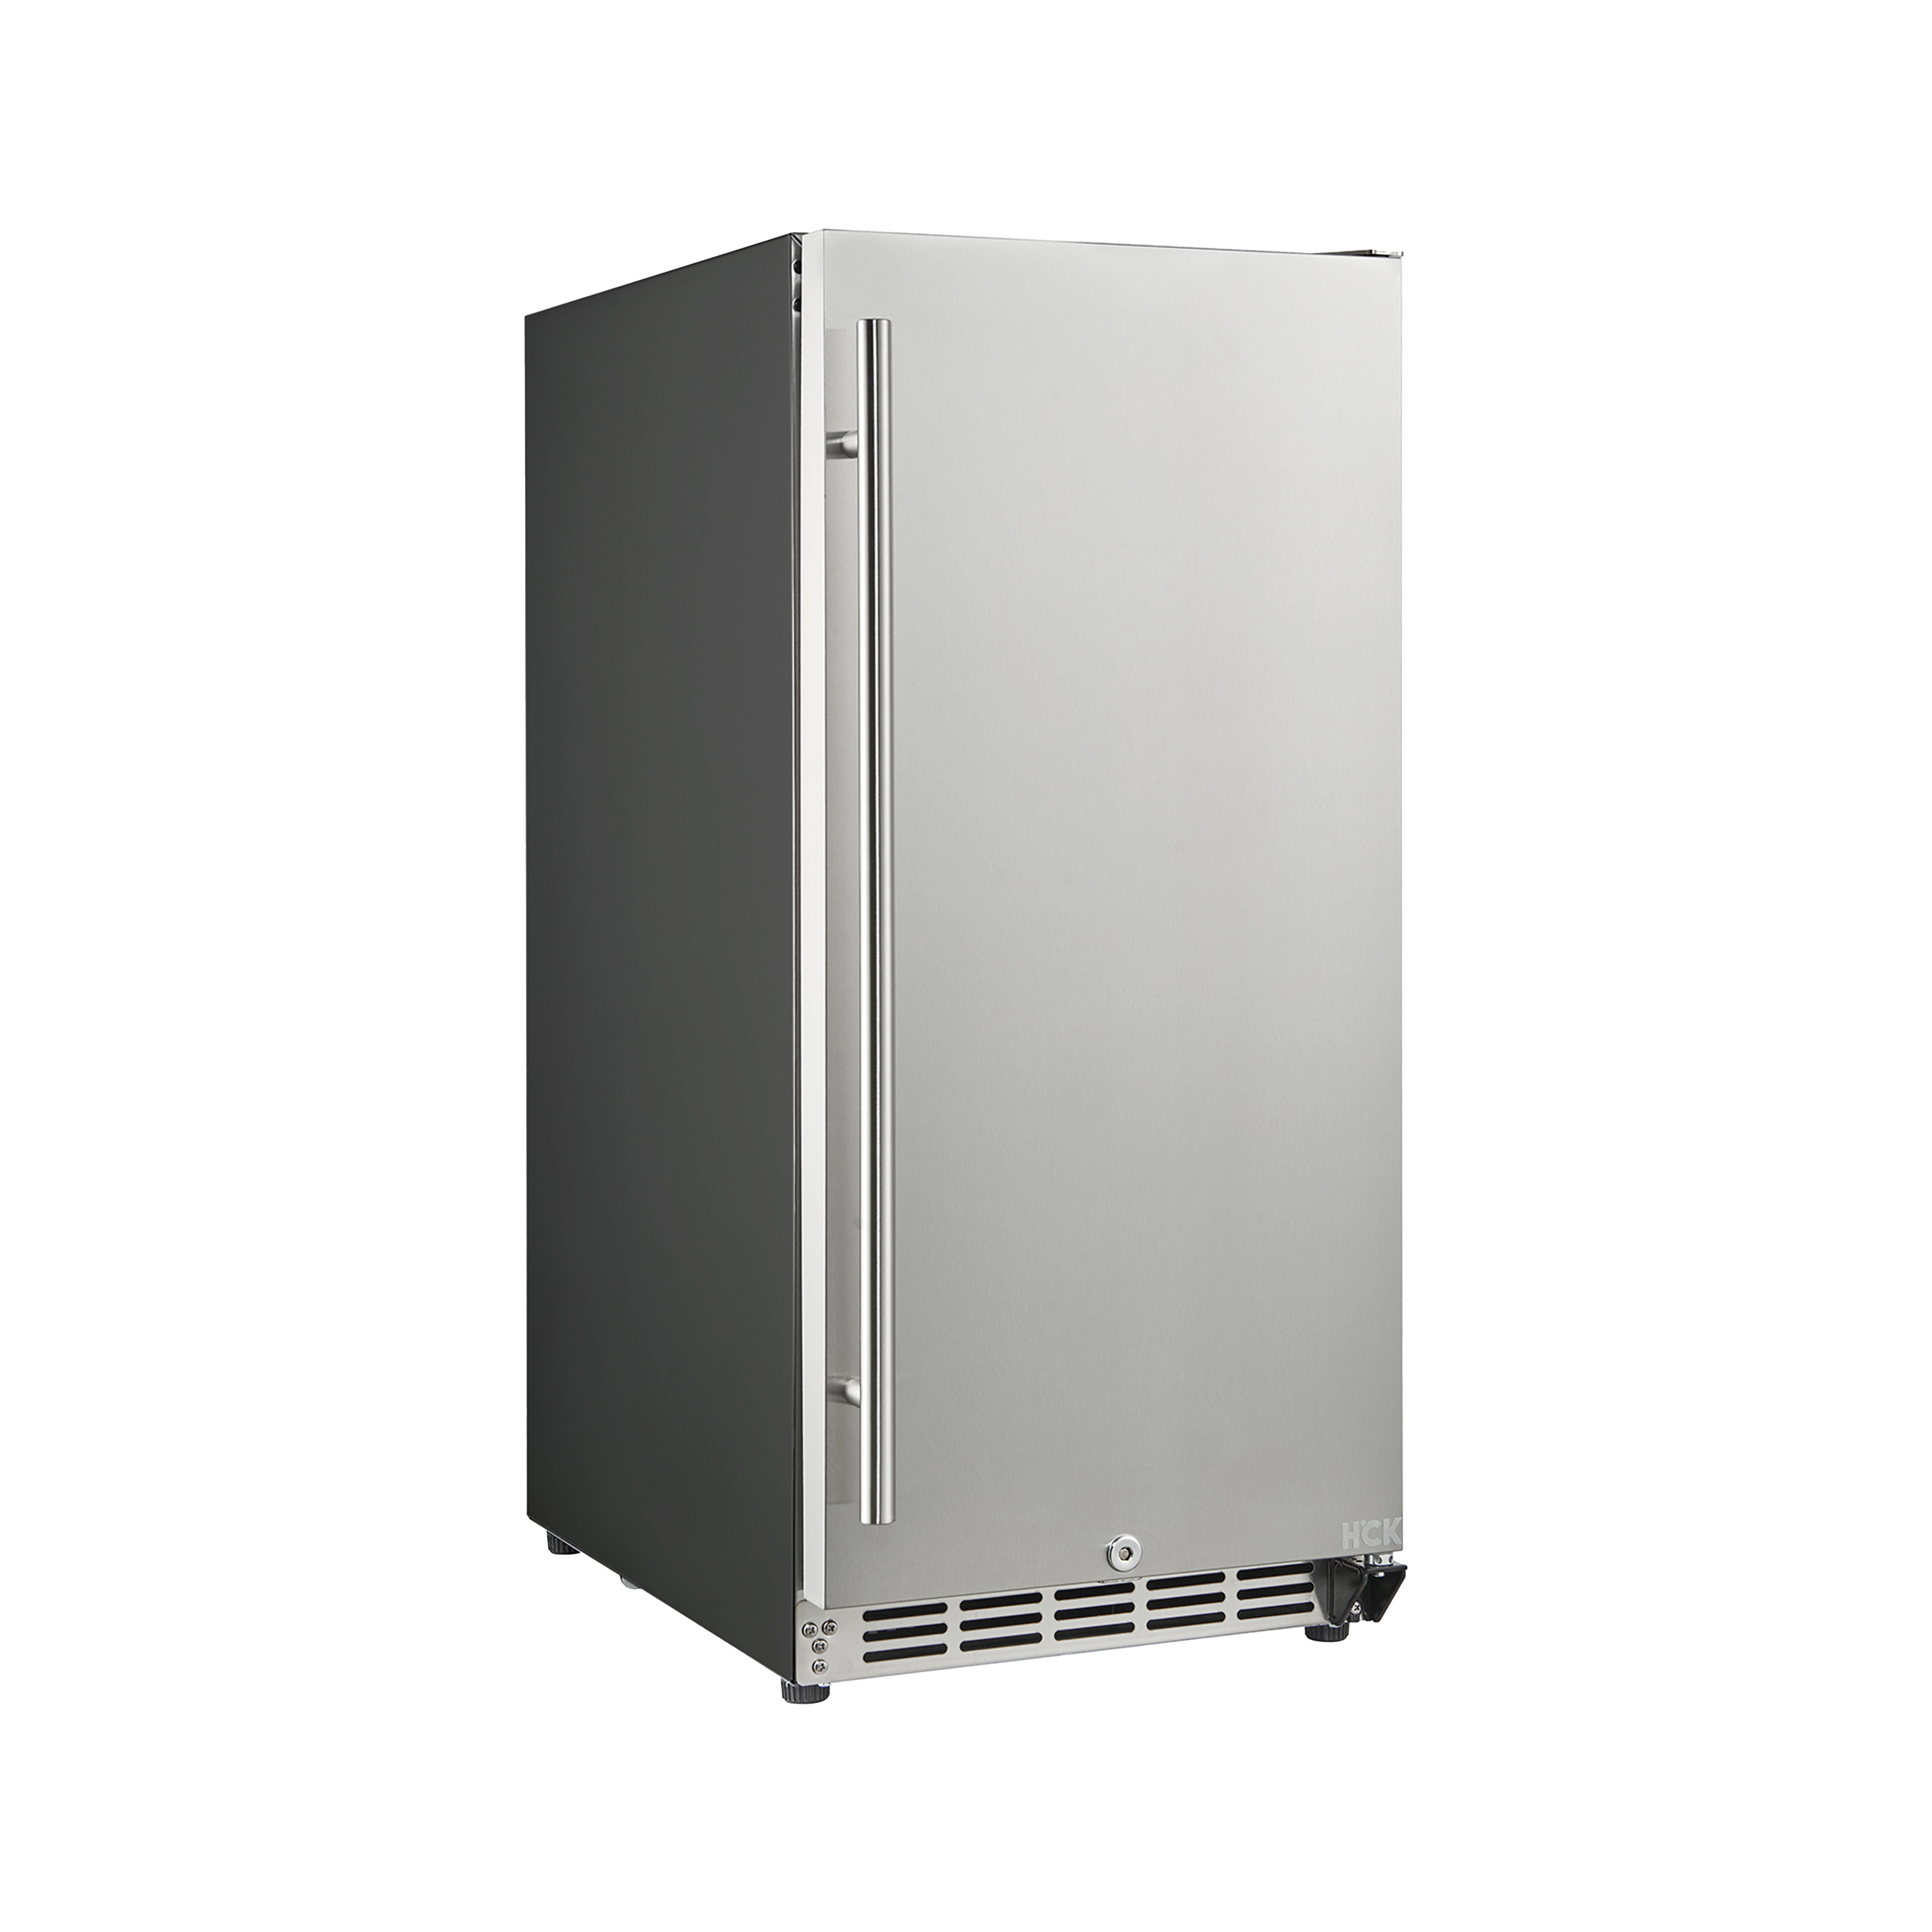 Side view of a Black 3.2 Cu Ft Undercounter Beverage Outdoor Refrigerator